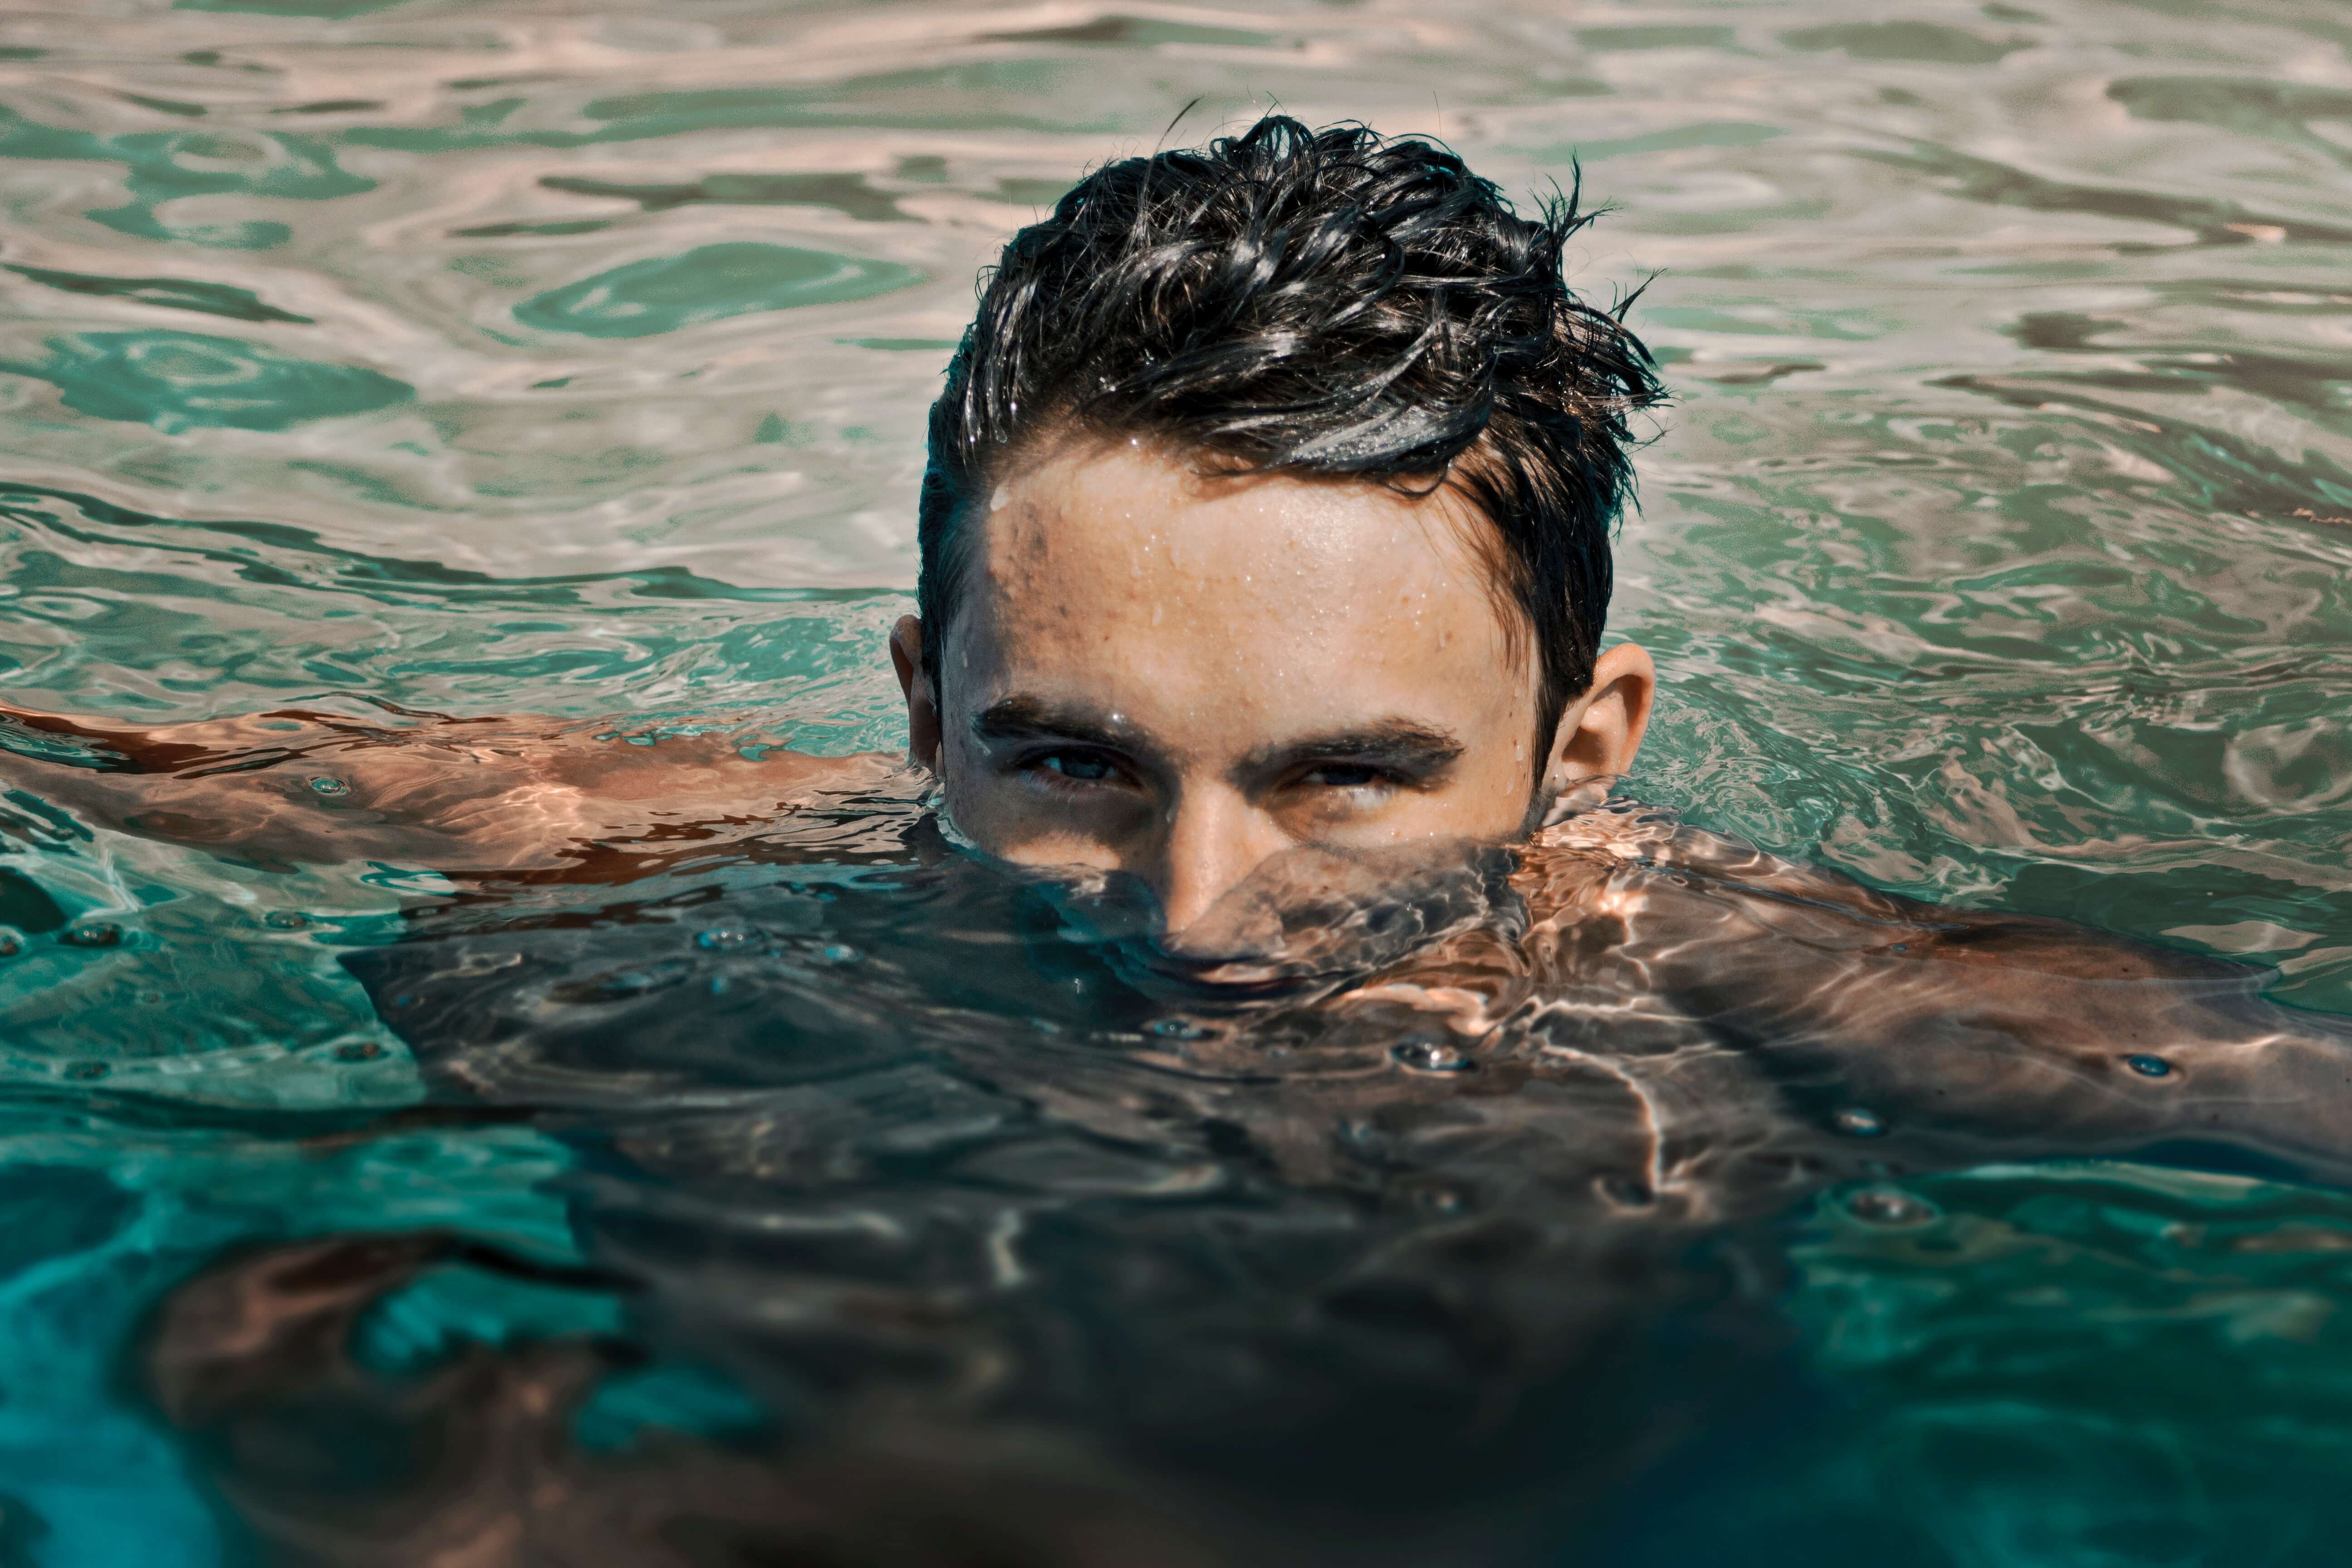 A young man floats in a saltwater pool, with just his eyes and forehead above the water line.